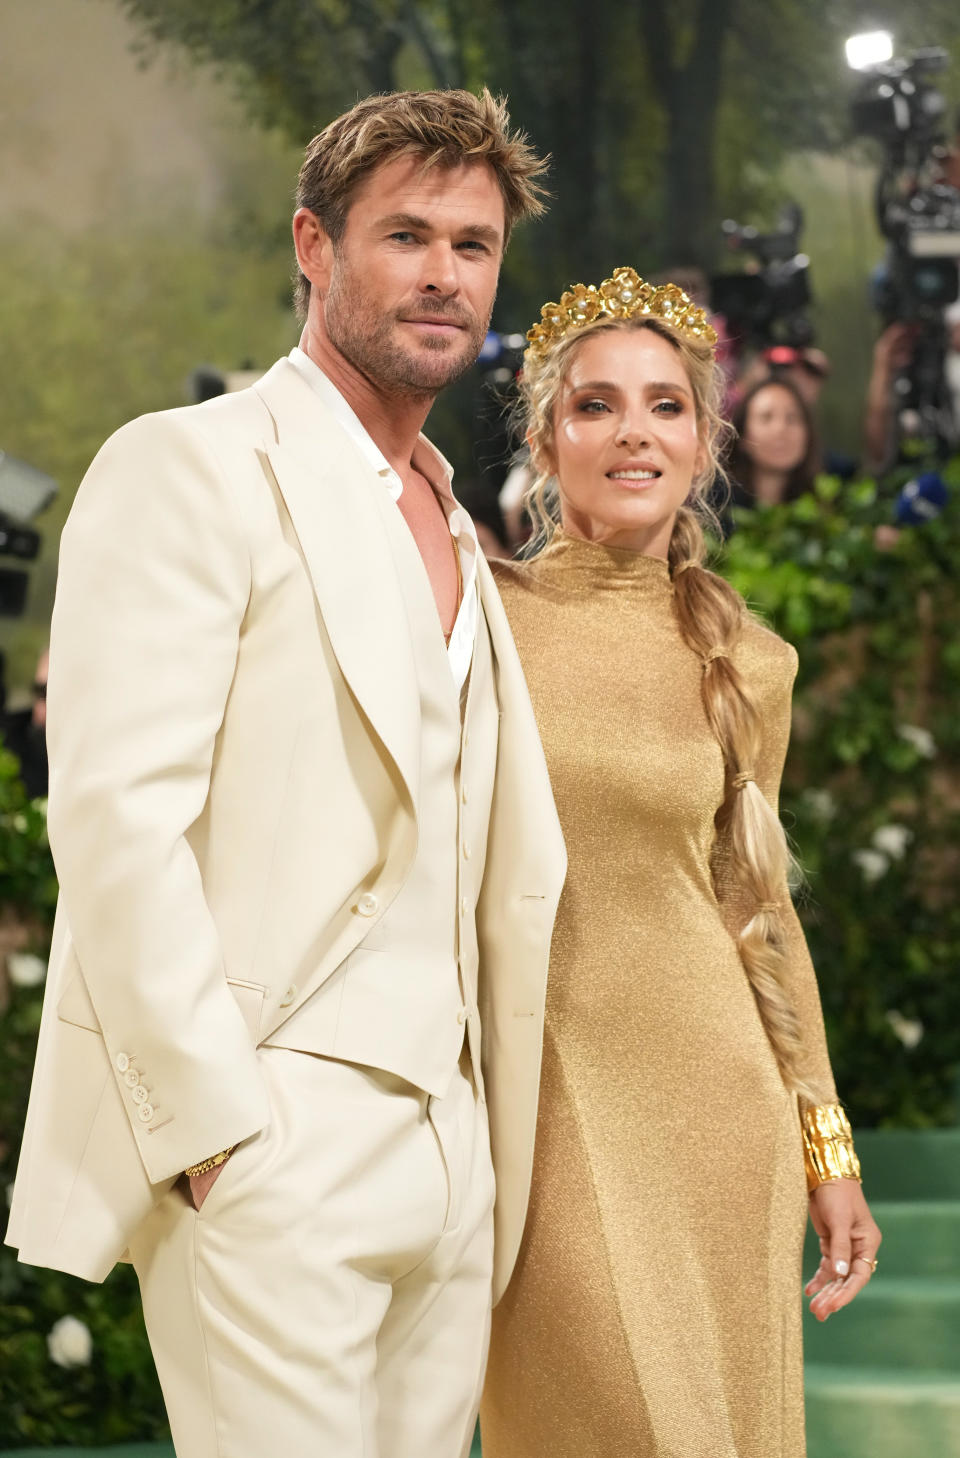 Chris Hemsworth and Elsa Pataky are certainly a golden couple. Photo: Getty